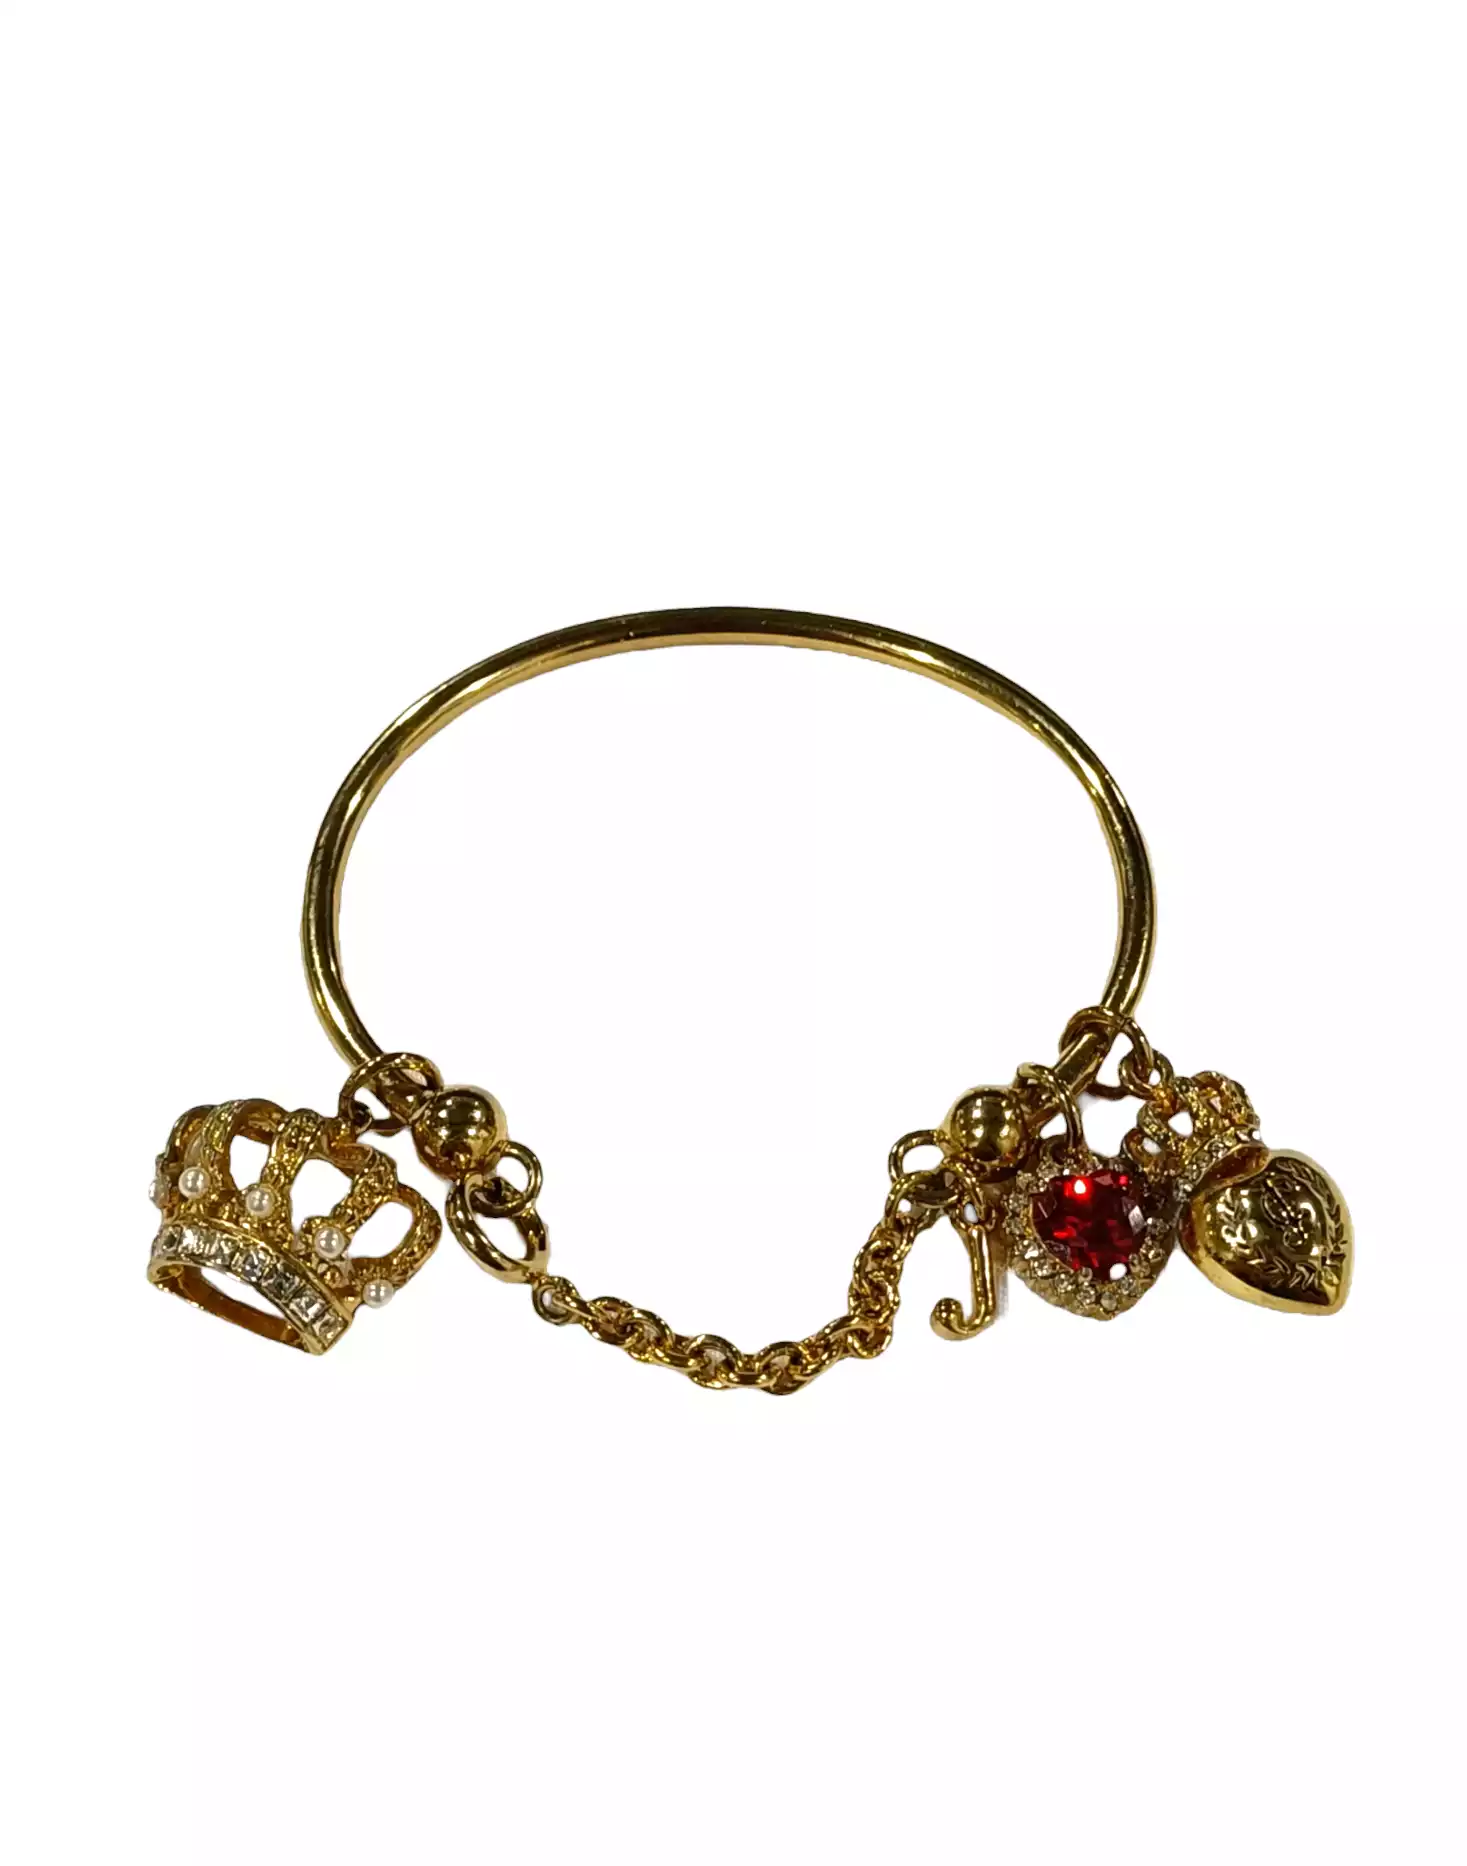 Bracelet by Juicy Couture